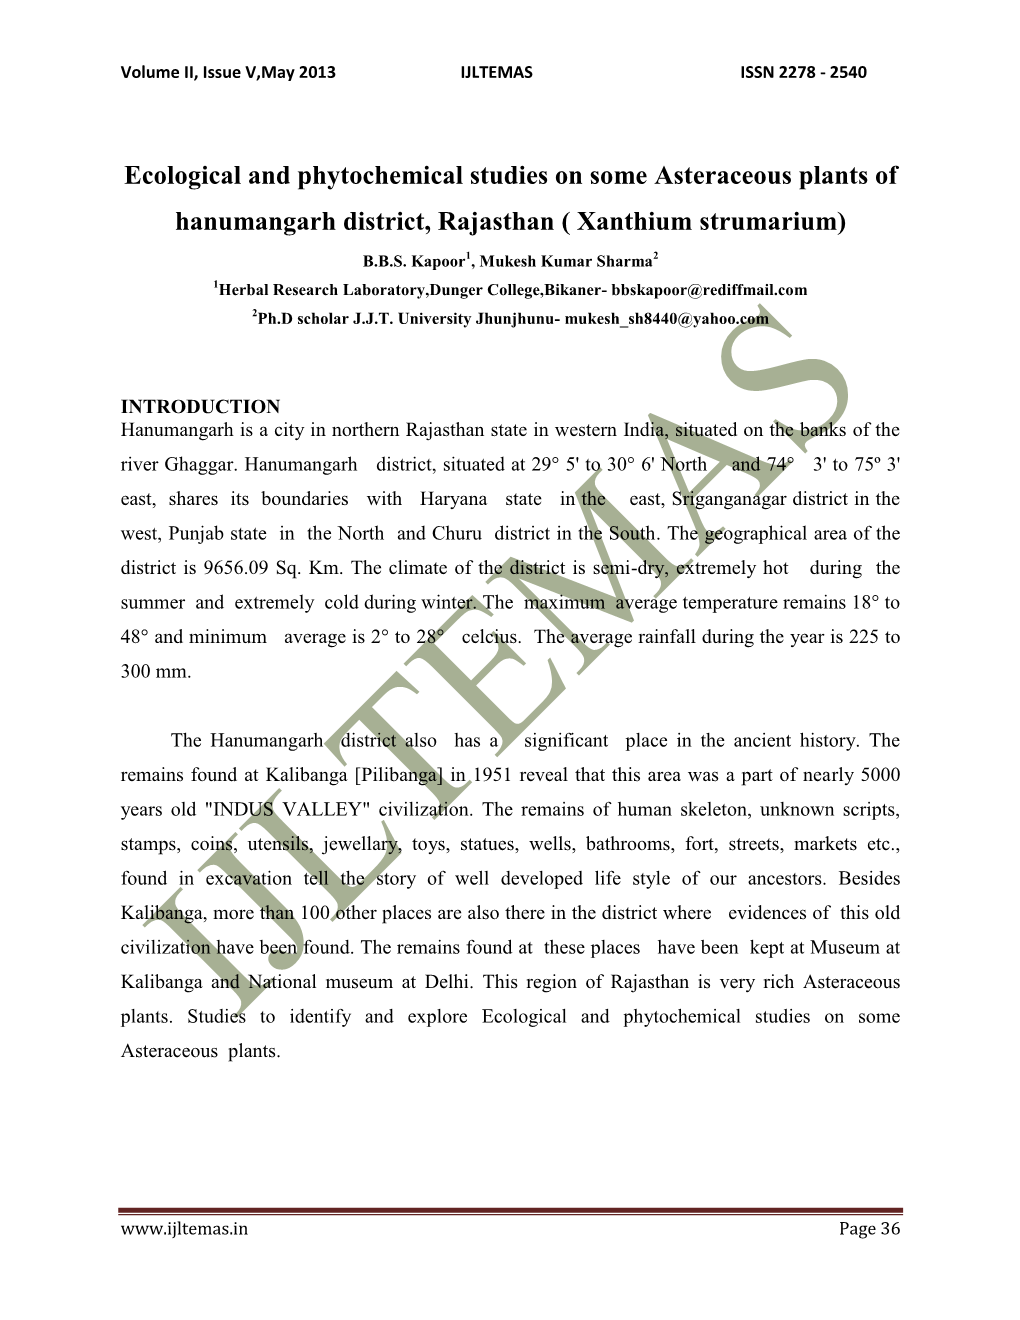 Ecological and Phytochemical Studies on Some Asteraceous Plants of Hanumangarh District, Rajasthan ( Xanthium Strumarium)